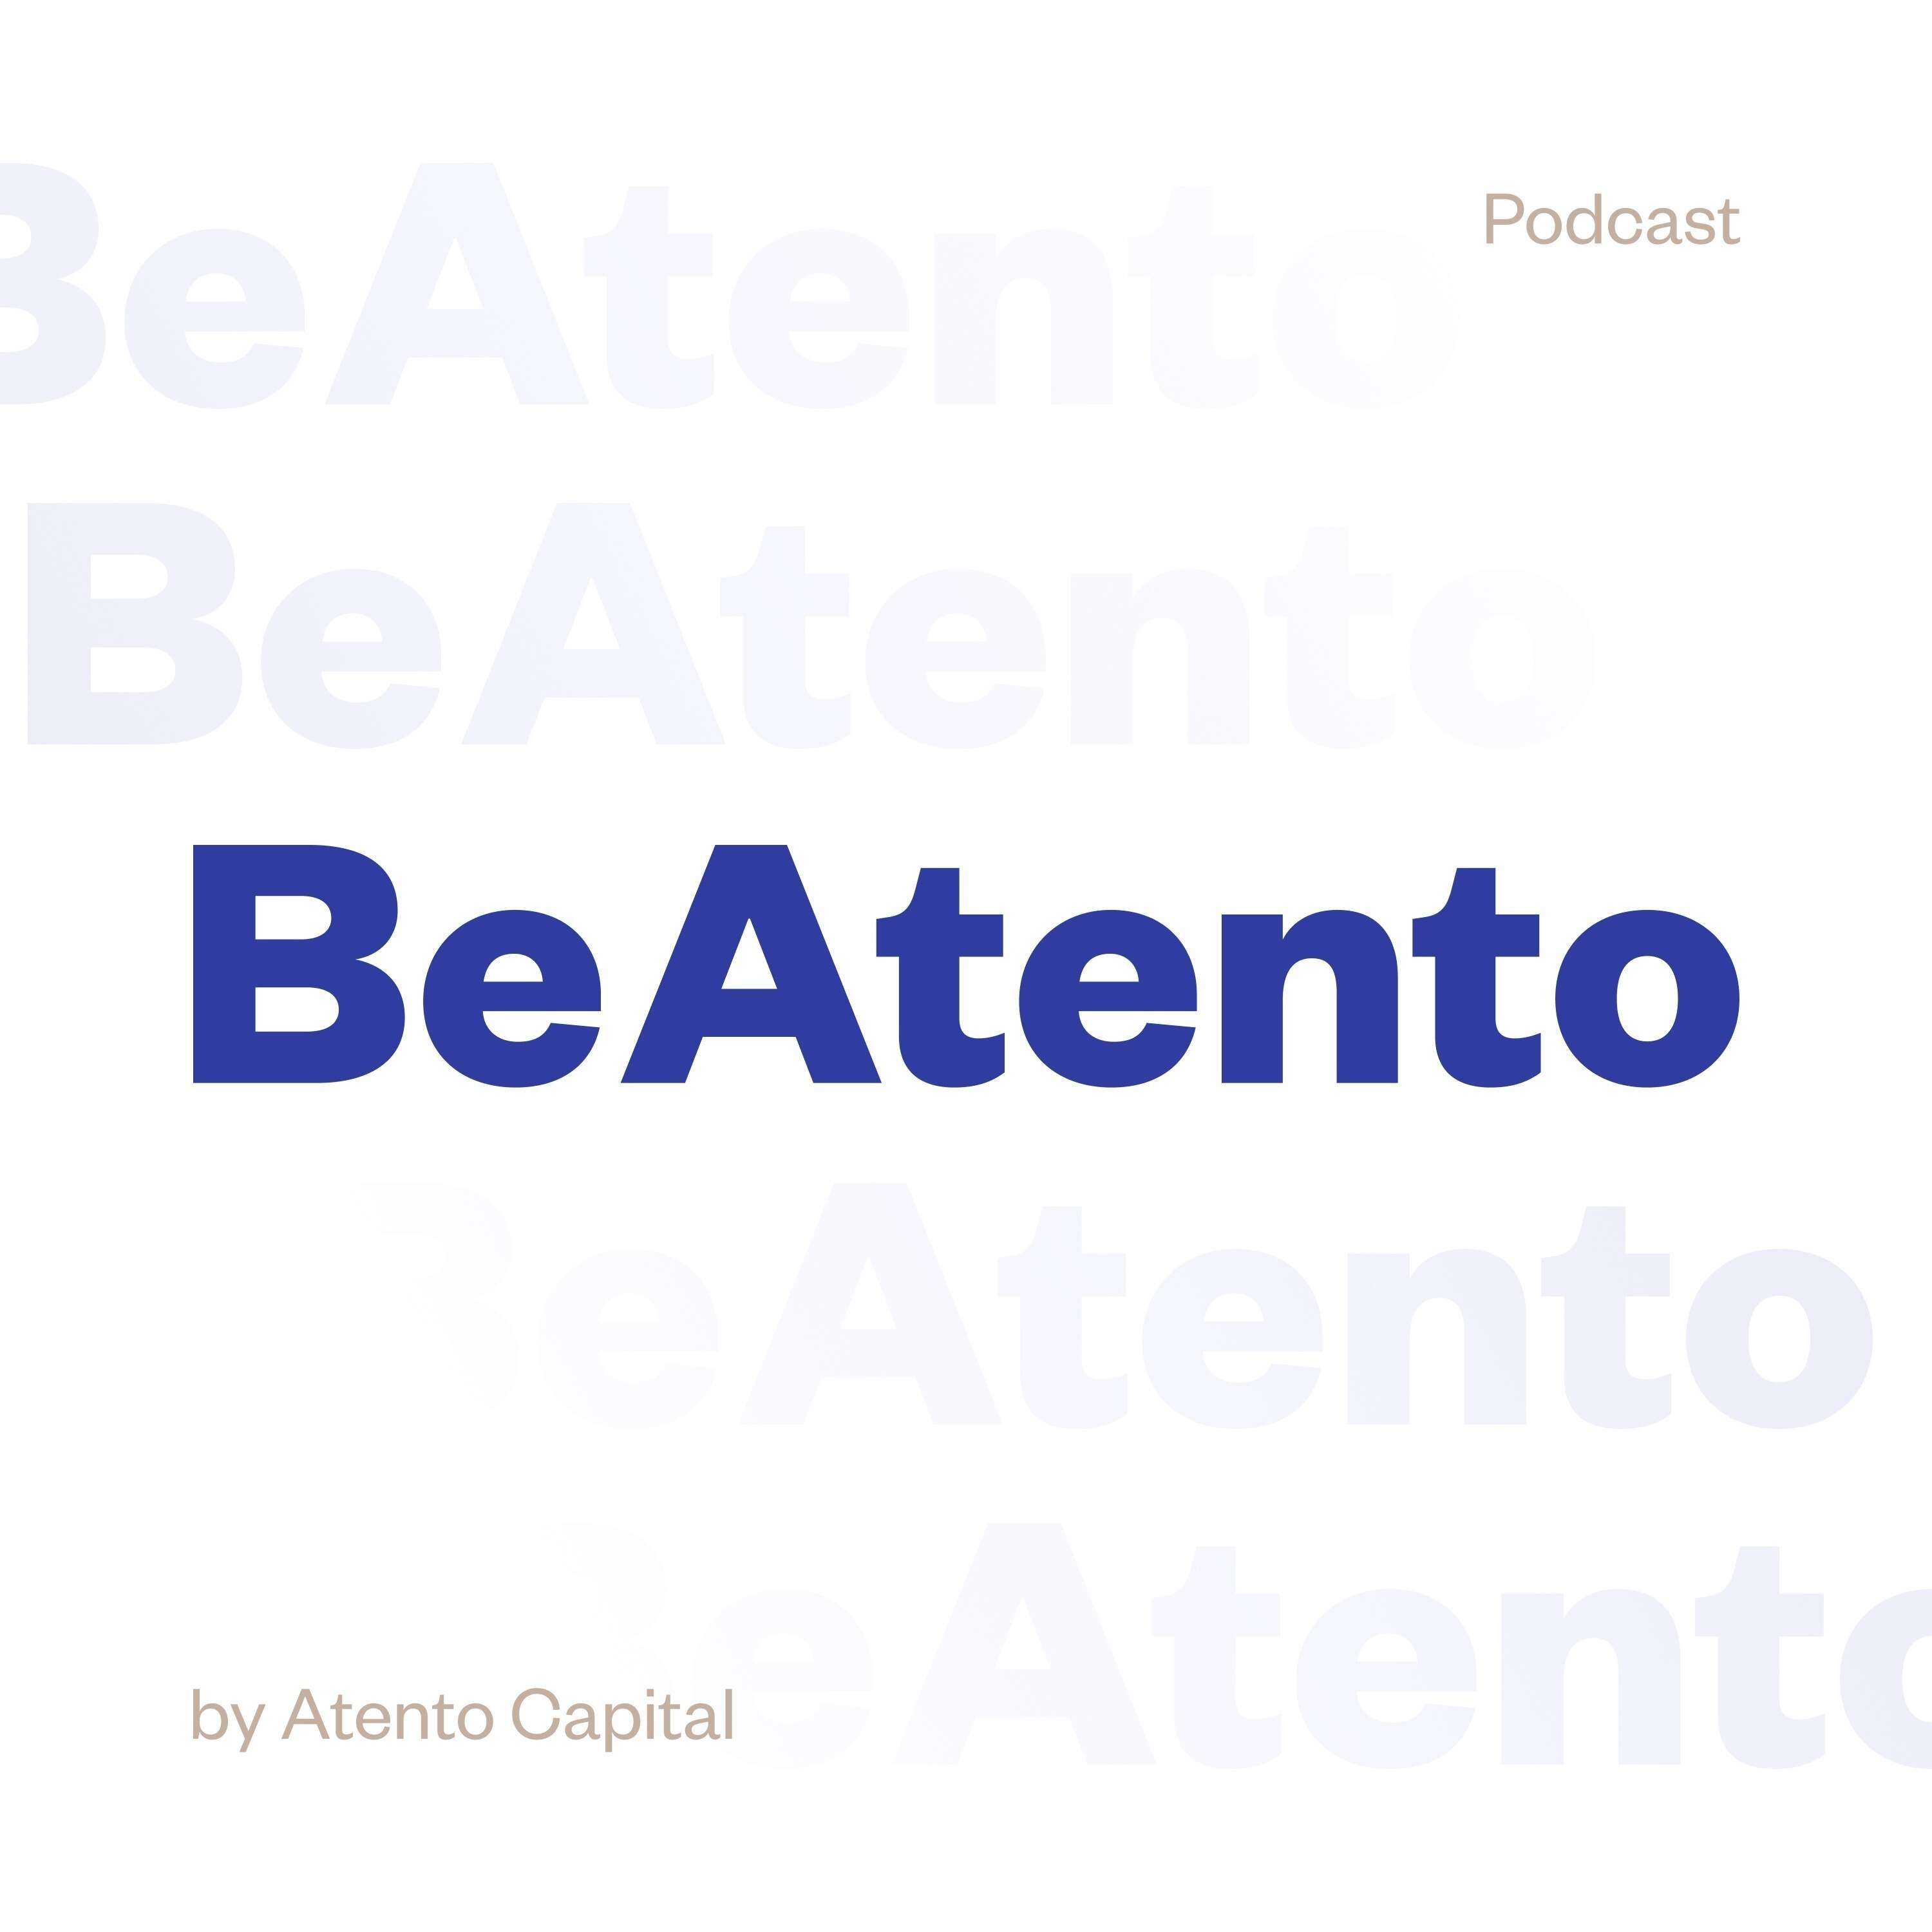 Artwork for podcast The Be Atento Podcast